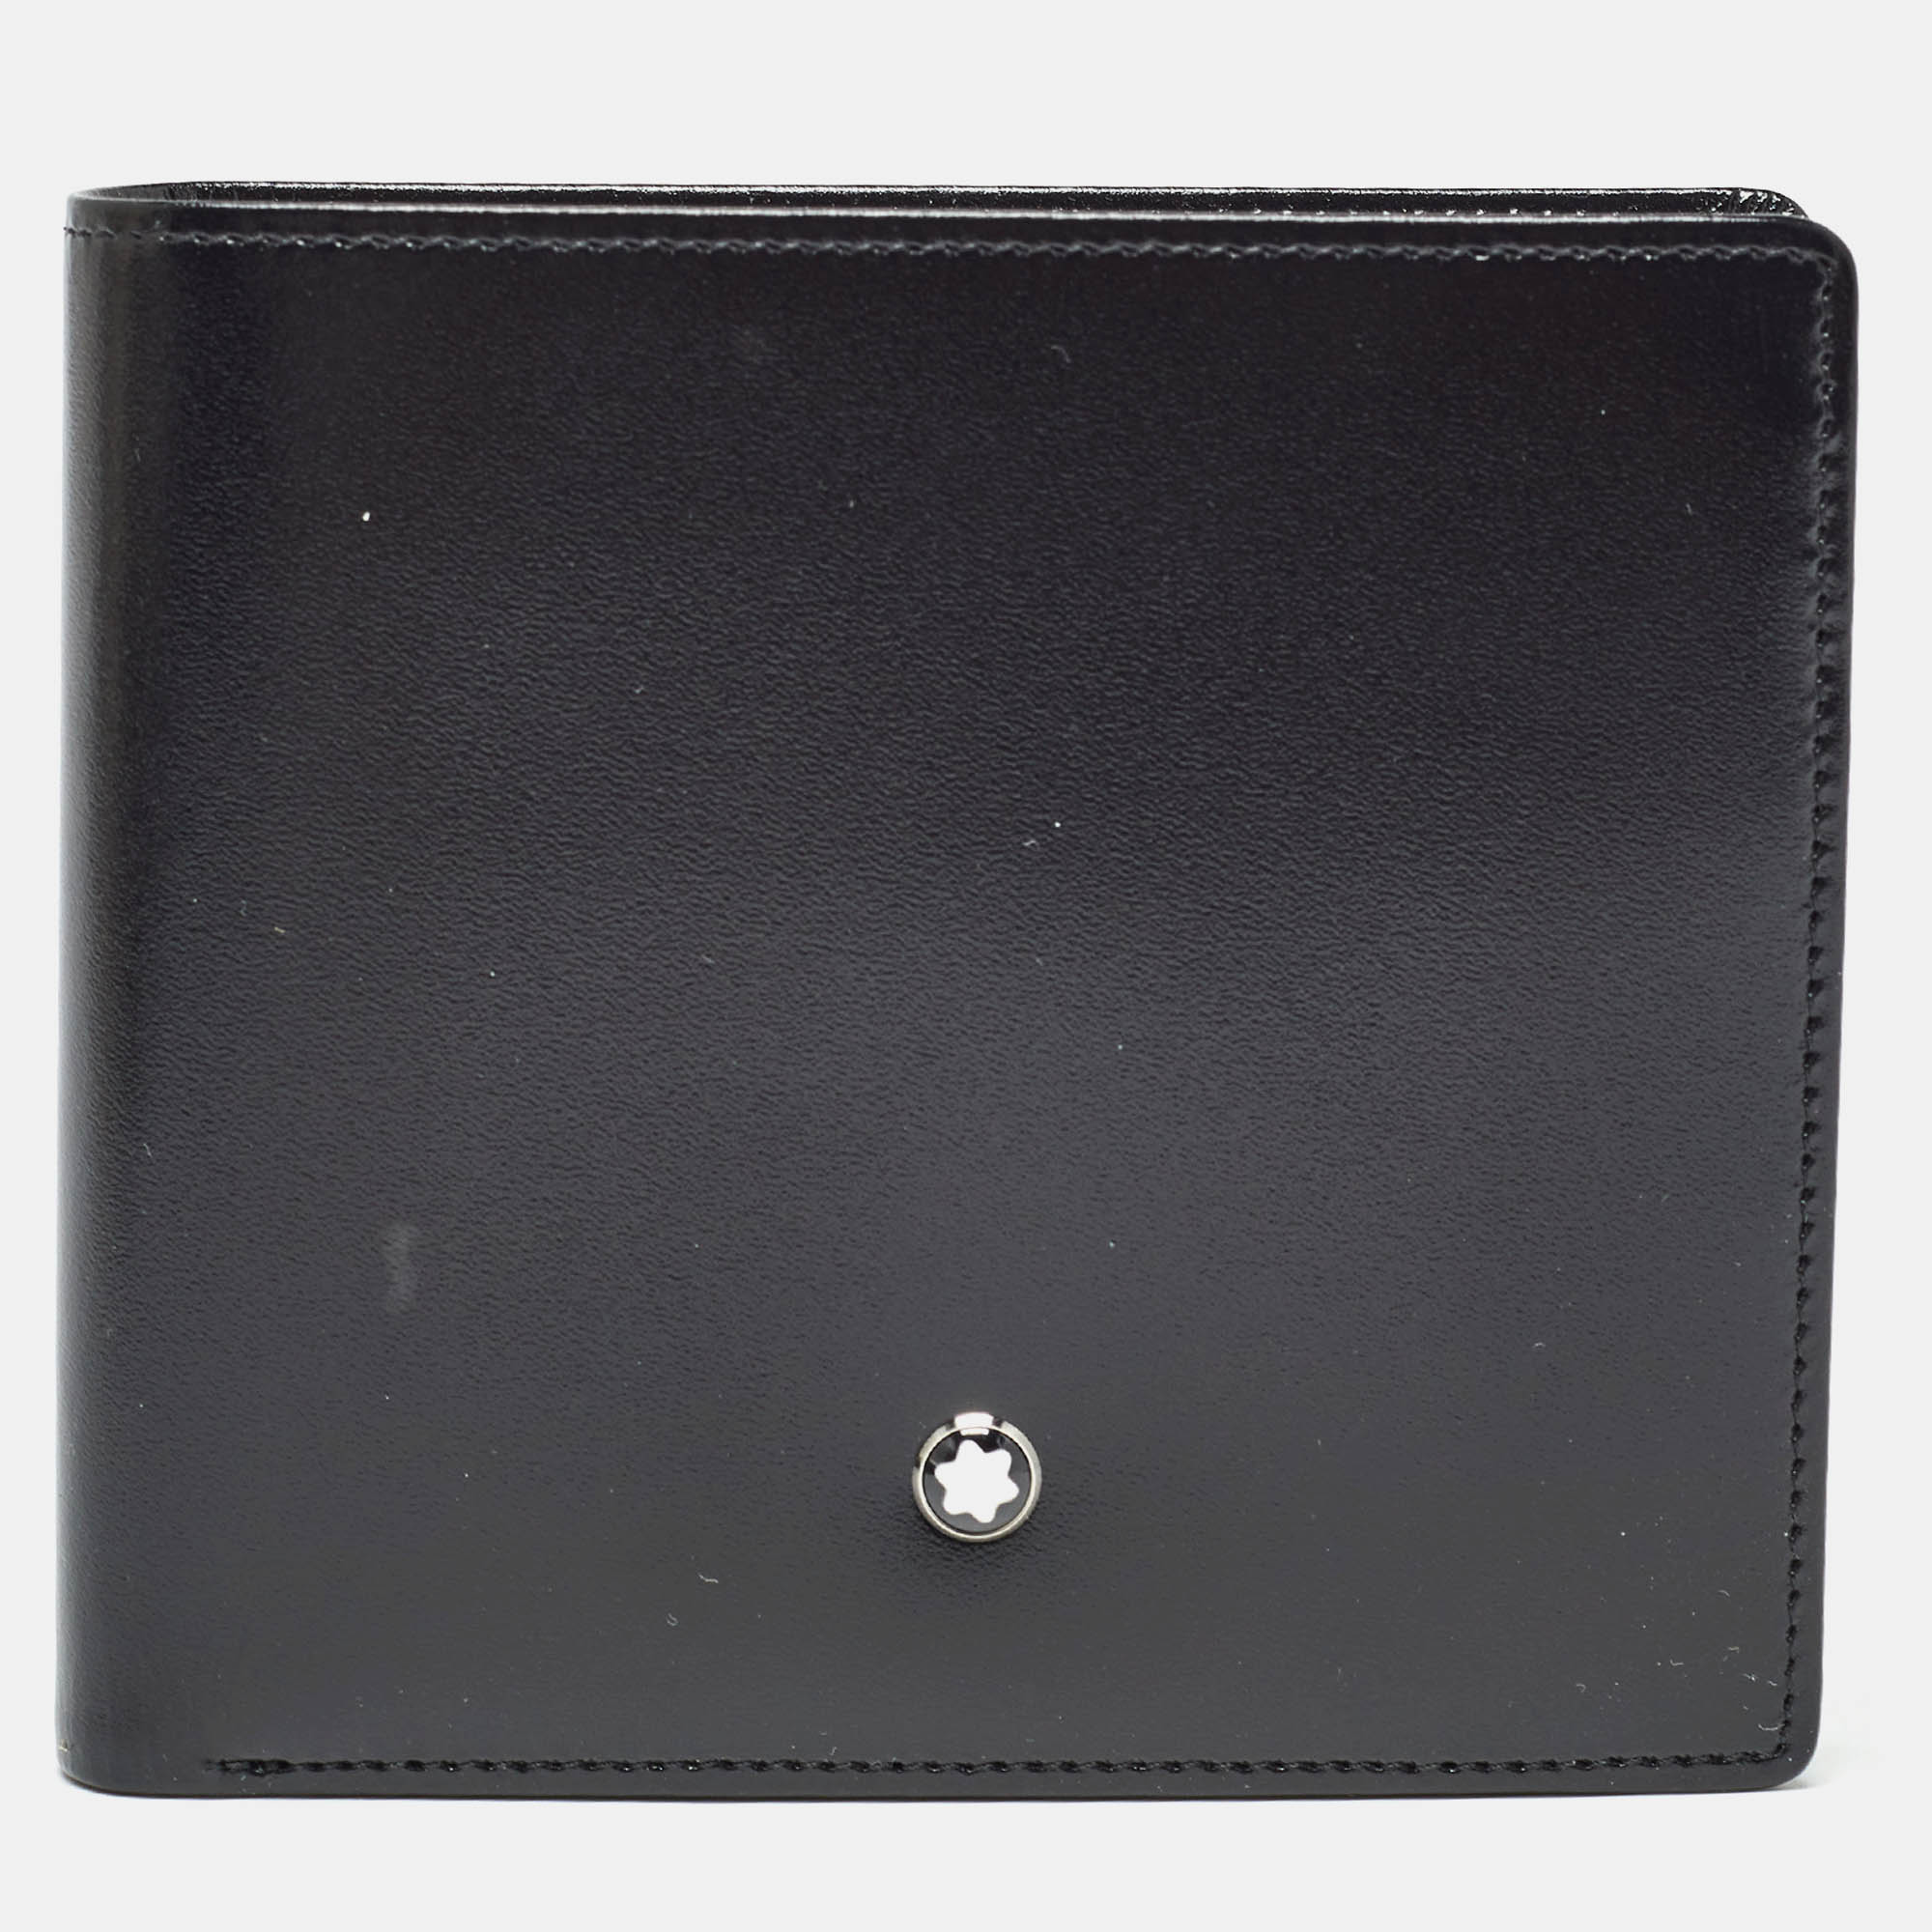 Pre-owned Montblanc Black Glossy Leather Meisterstück 4cc Bifold Wallet